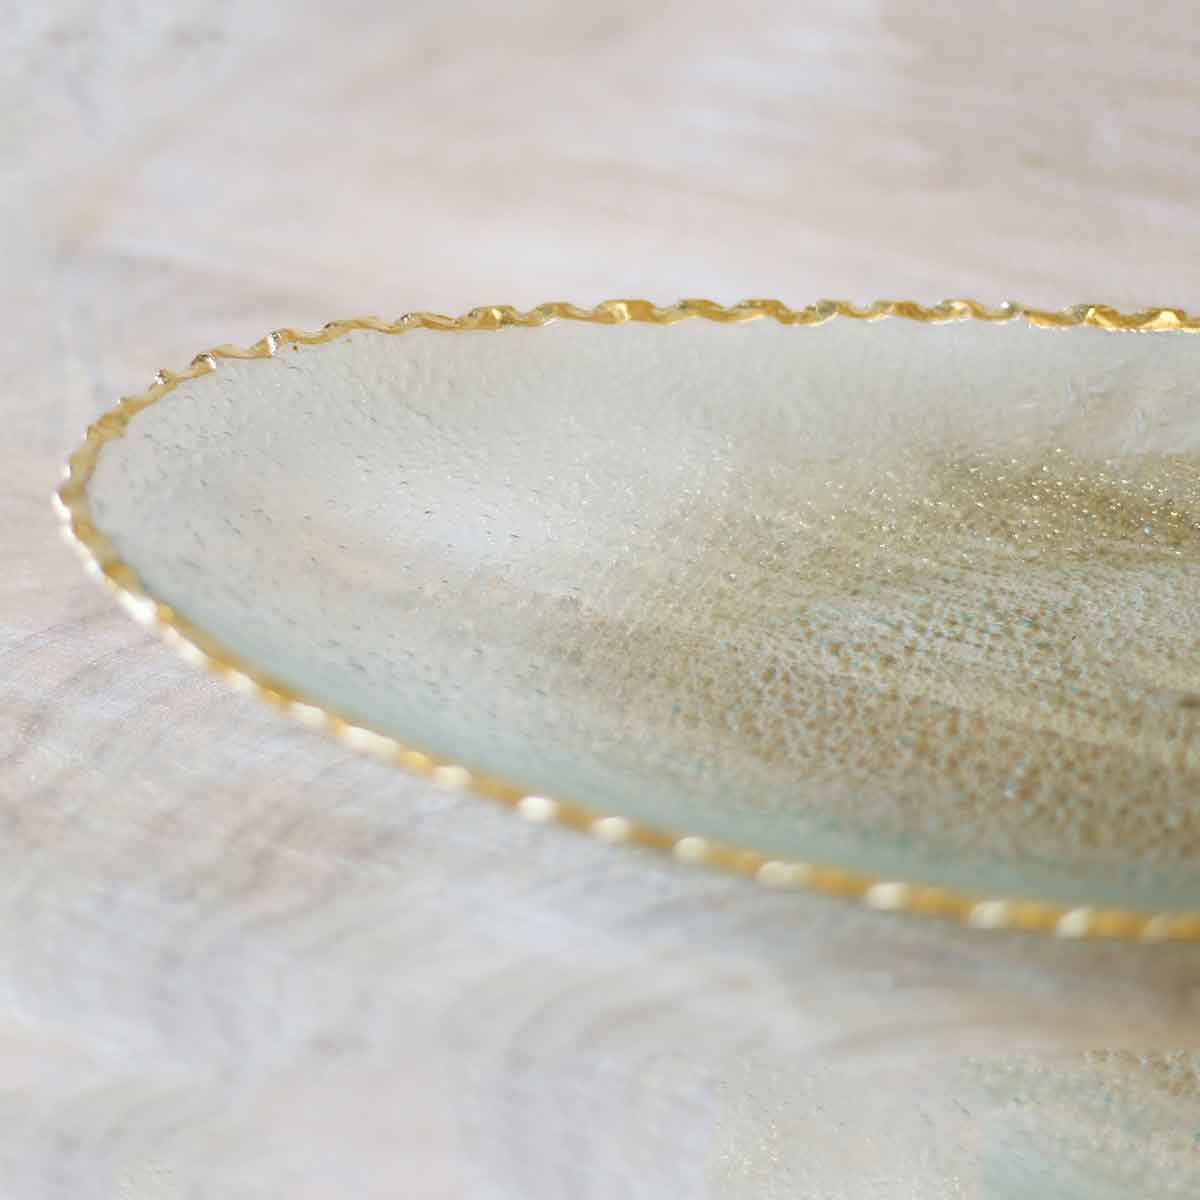 Glass Oval Serving Tray w/Gold trim